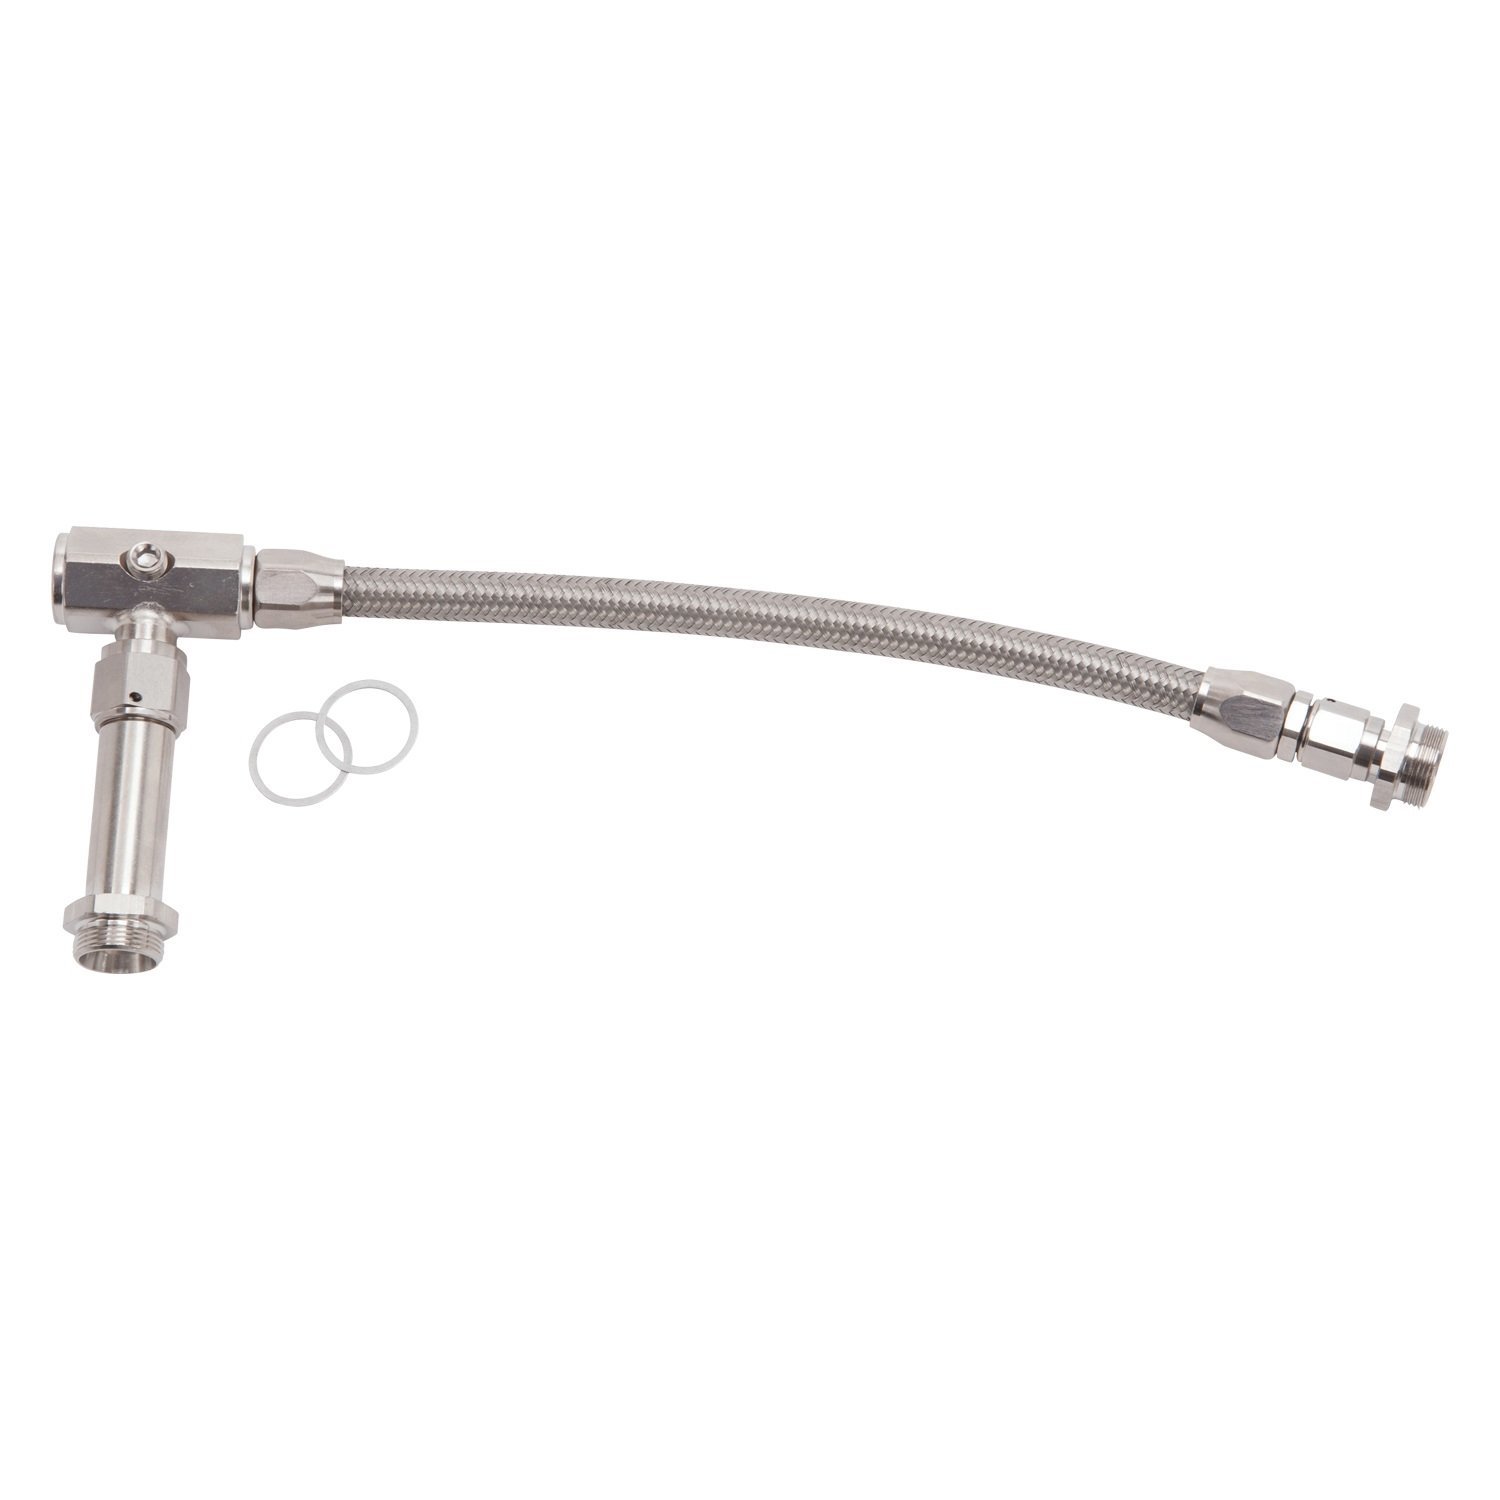 Russell Performance 641091 Carburetor Fuel Line, 3/8 in NPT Female Inlet, 7/8-20 in Dual Outlets, Braided Stainless Hose, Silver, Holley 4150, Kit